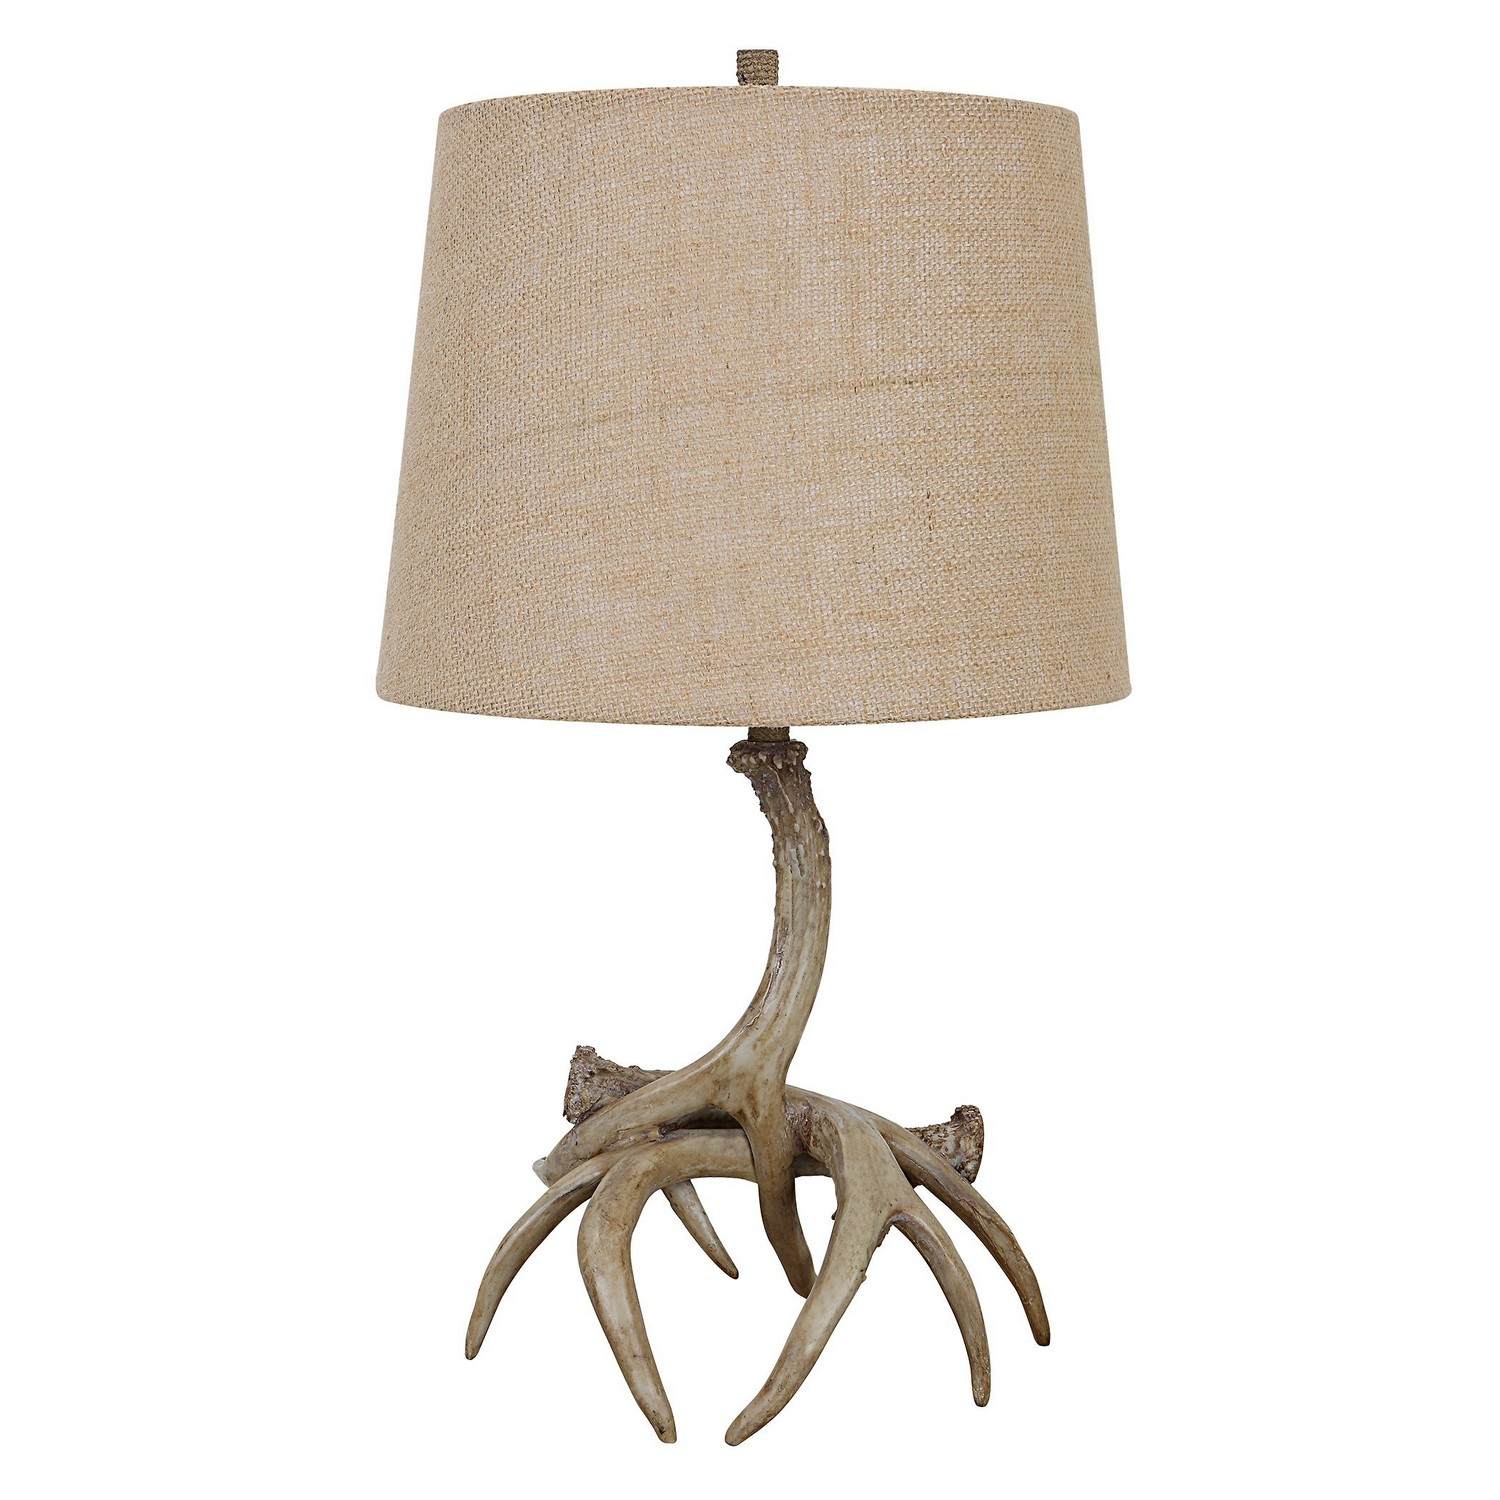 Uttermost W26095-1 Table Lamp - Natural